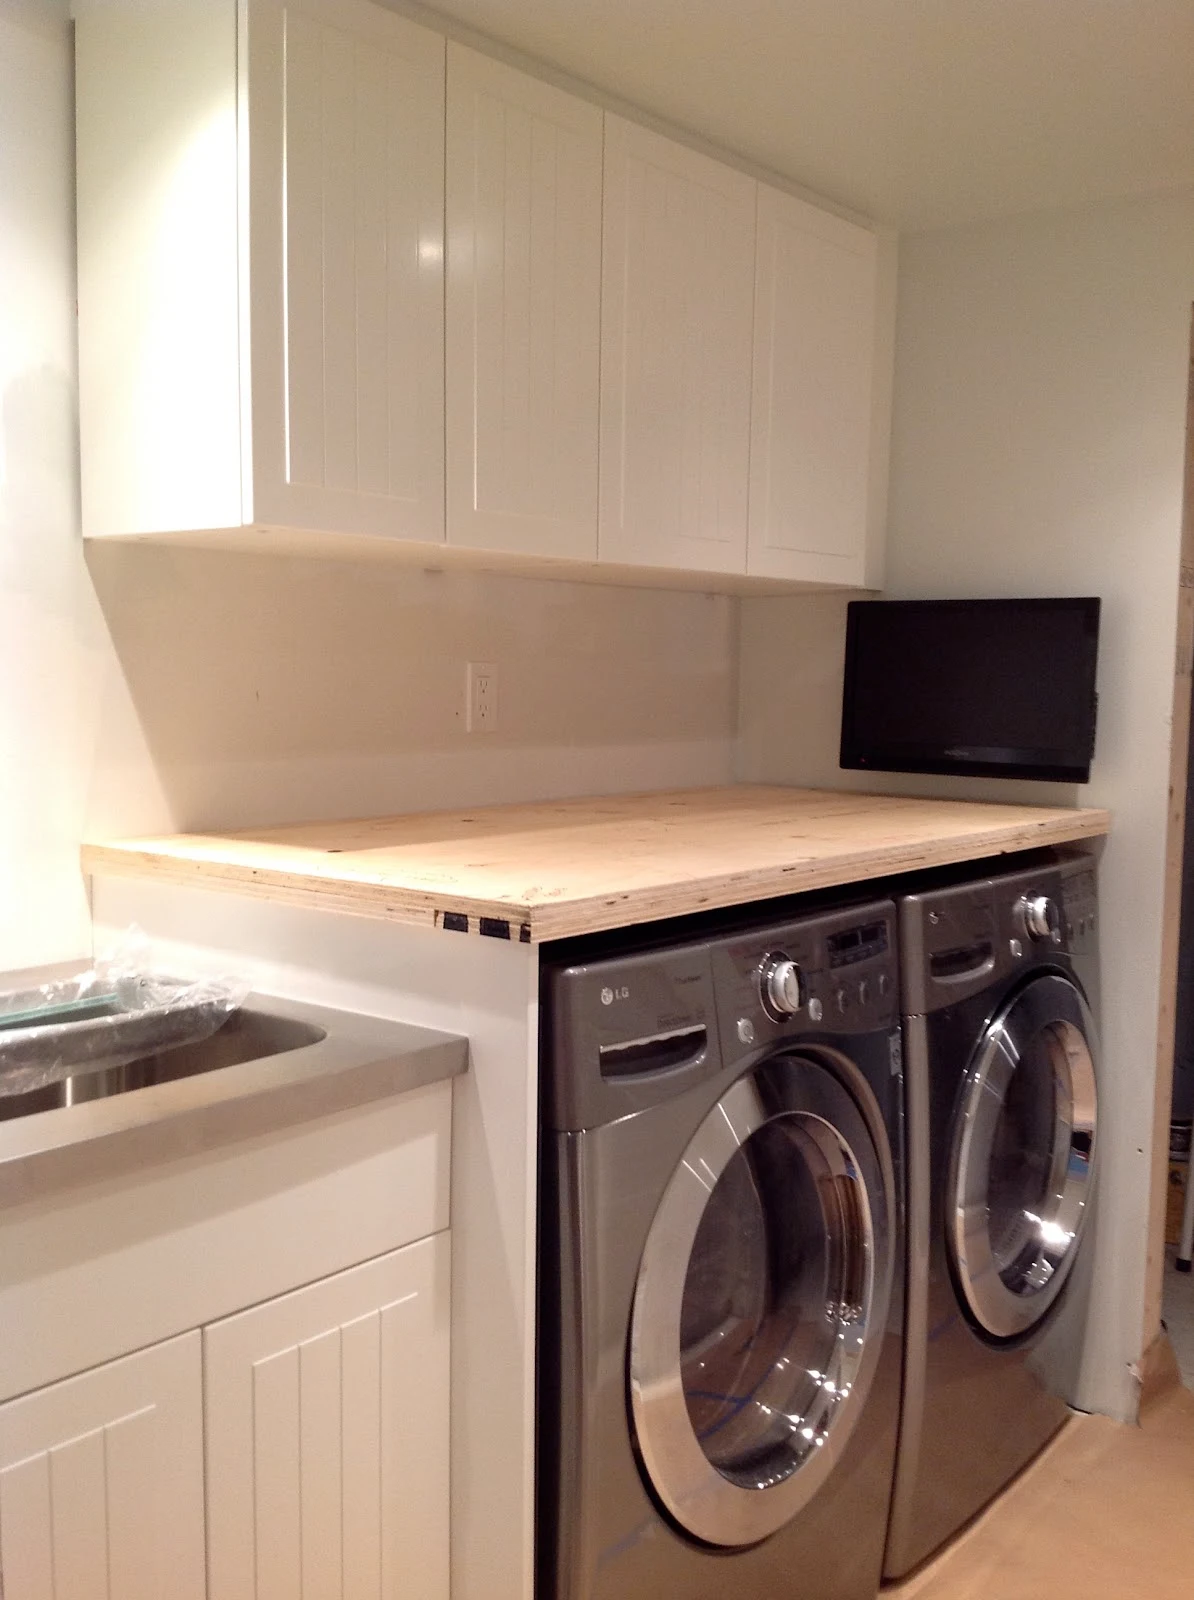 counter over front load washer and dryer, How To Install A Countertop Over A Washer And Dryer, DIY floating countertop in the laundry room, countertop cleat, countertop gable